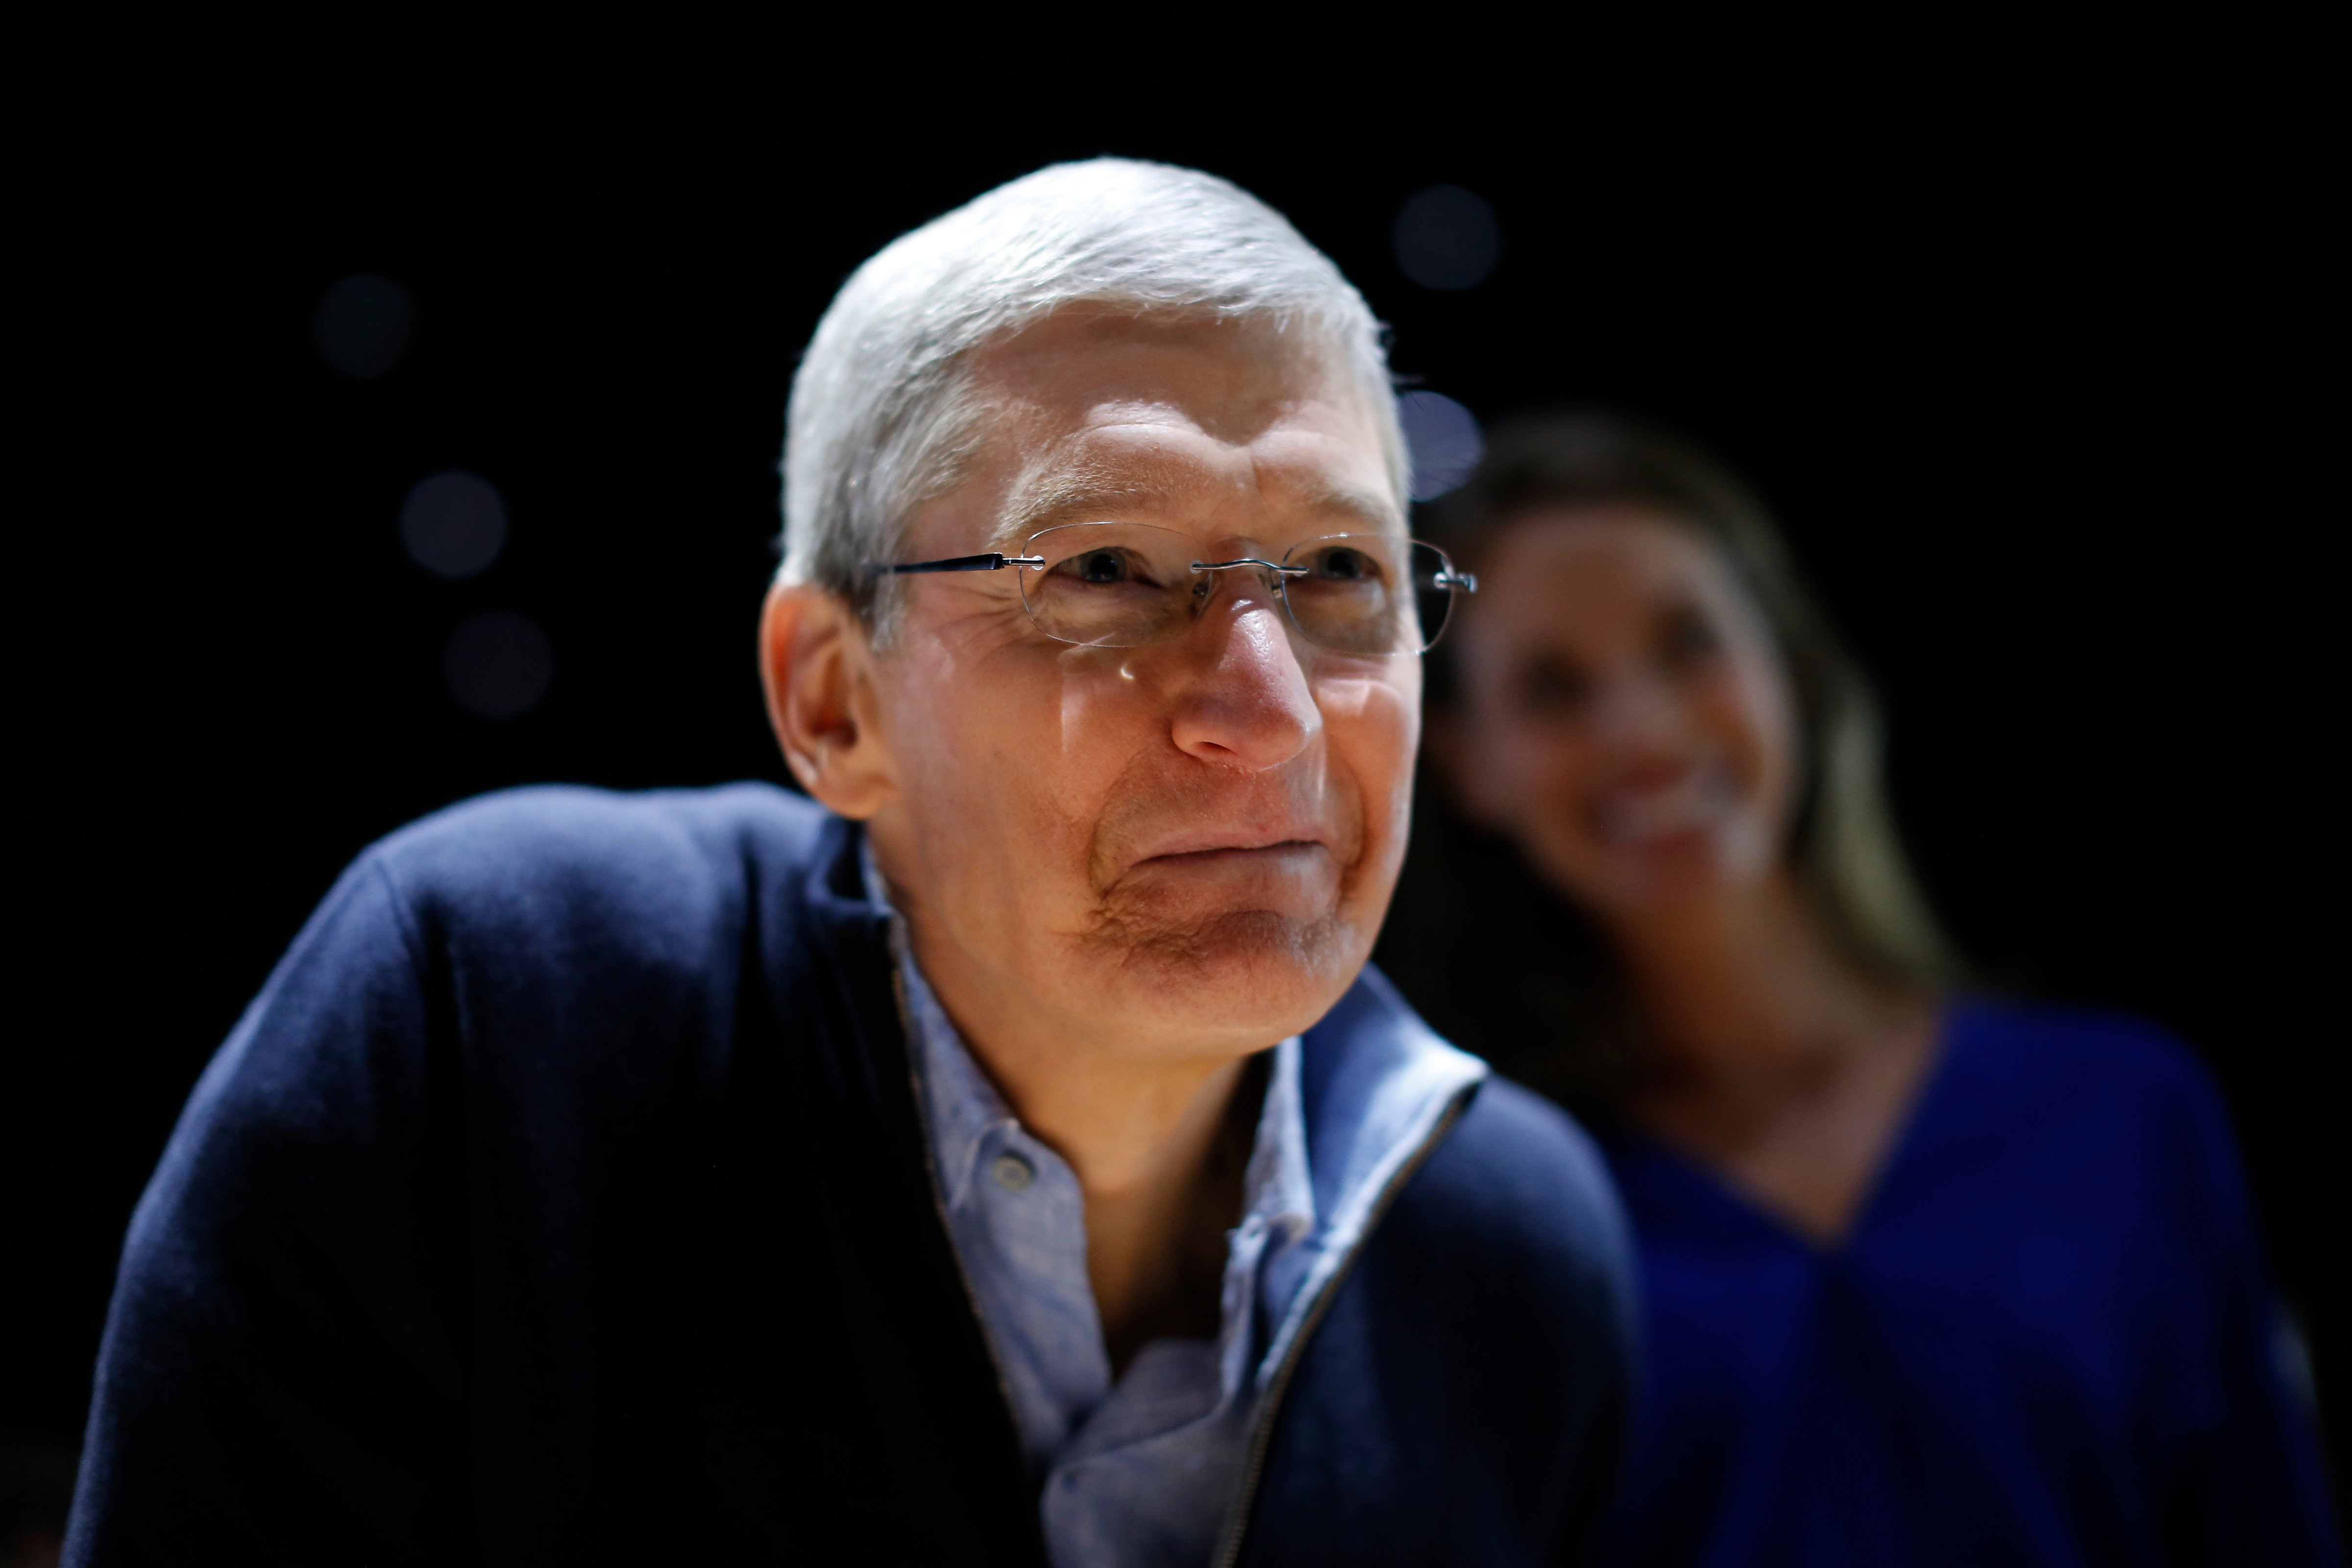 Apple CEO Tim Cook attends an Apple special event at the Yerba Buena Center for the Arts in San Francisco, on March 9, 2015